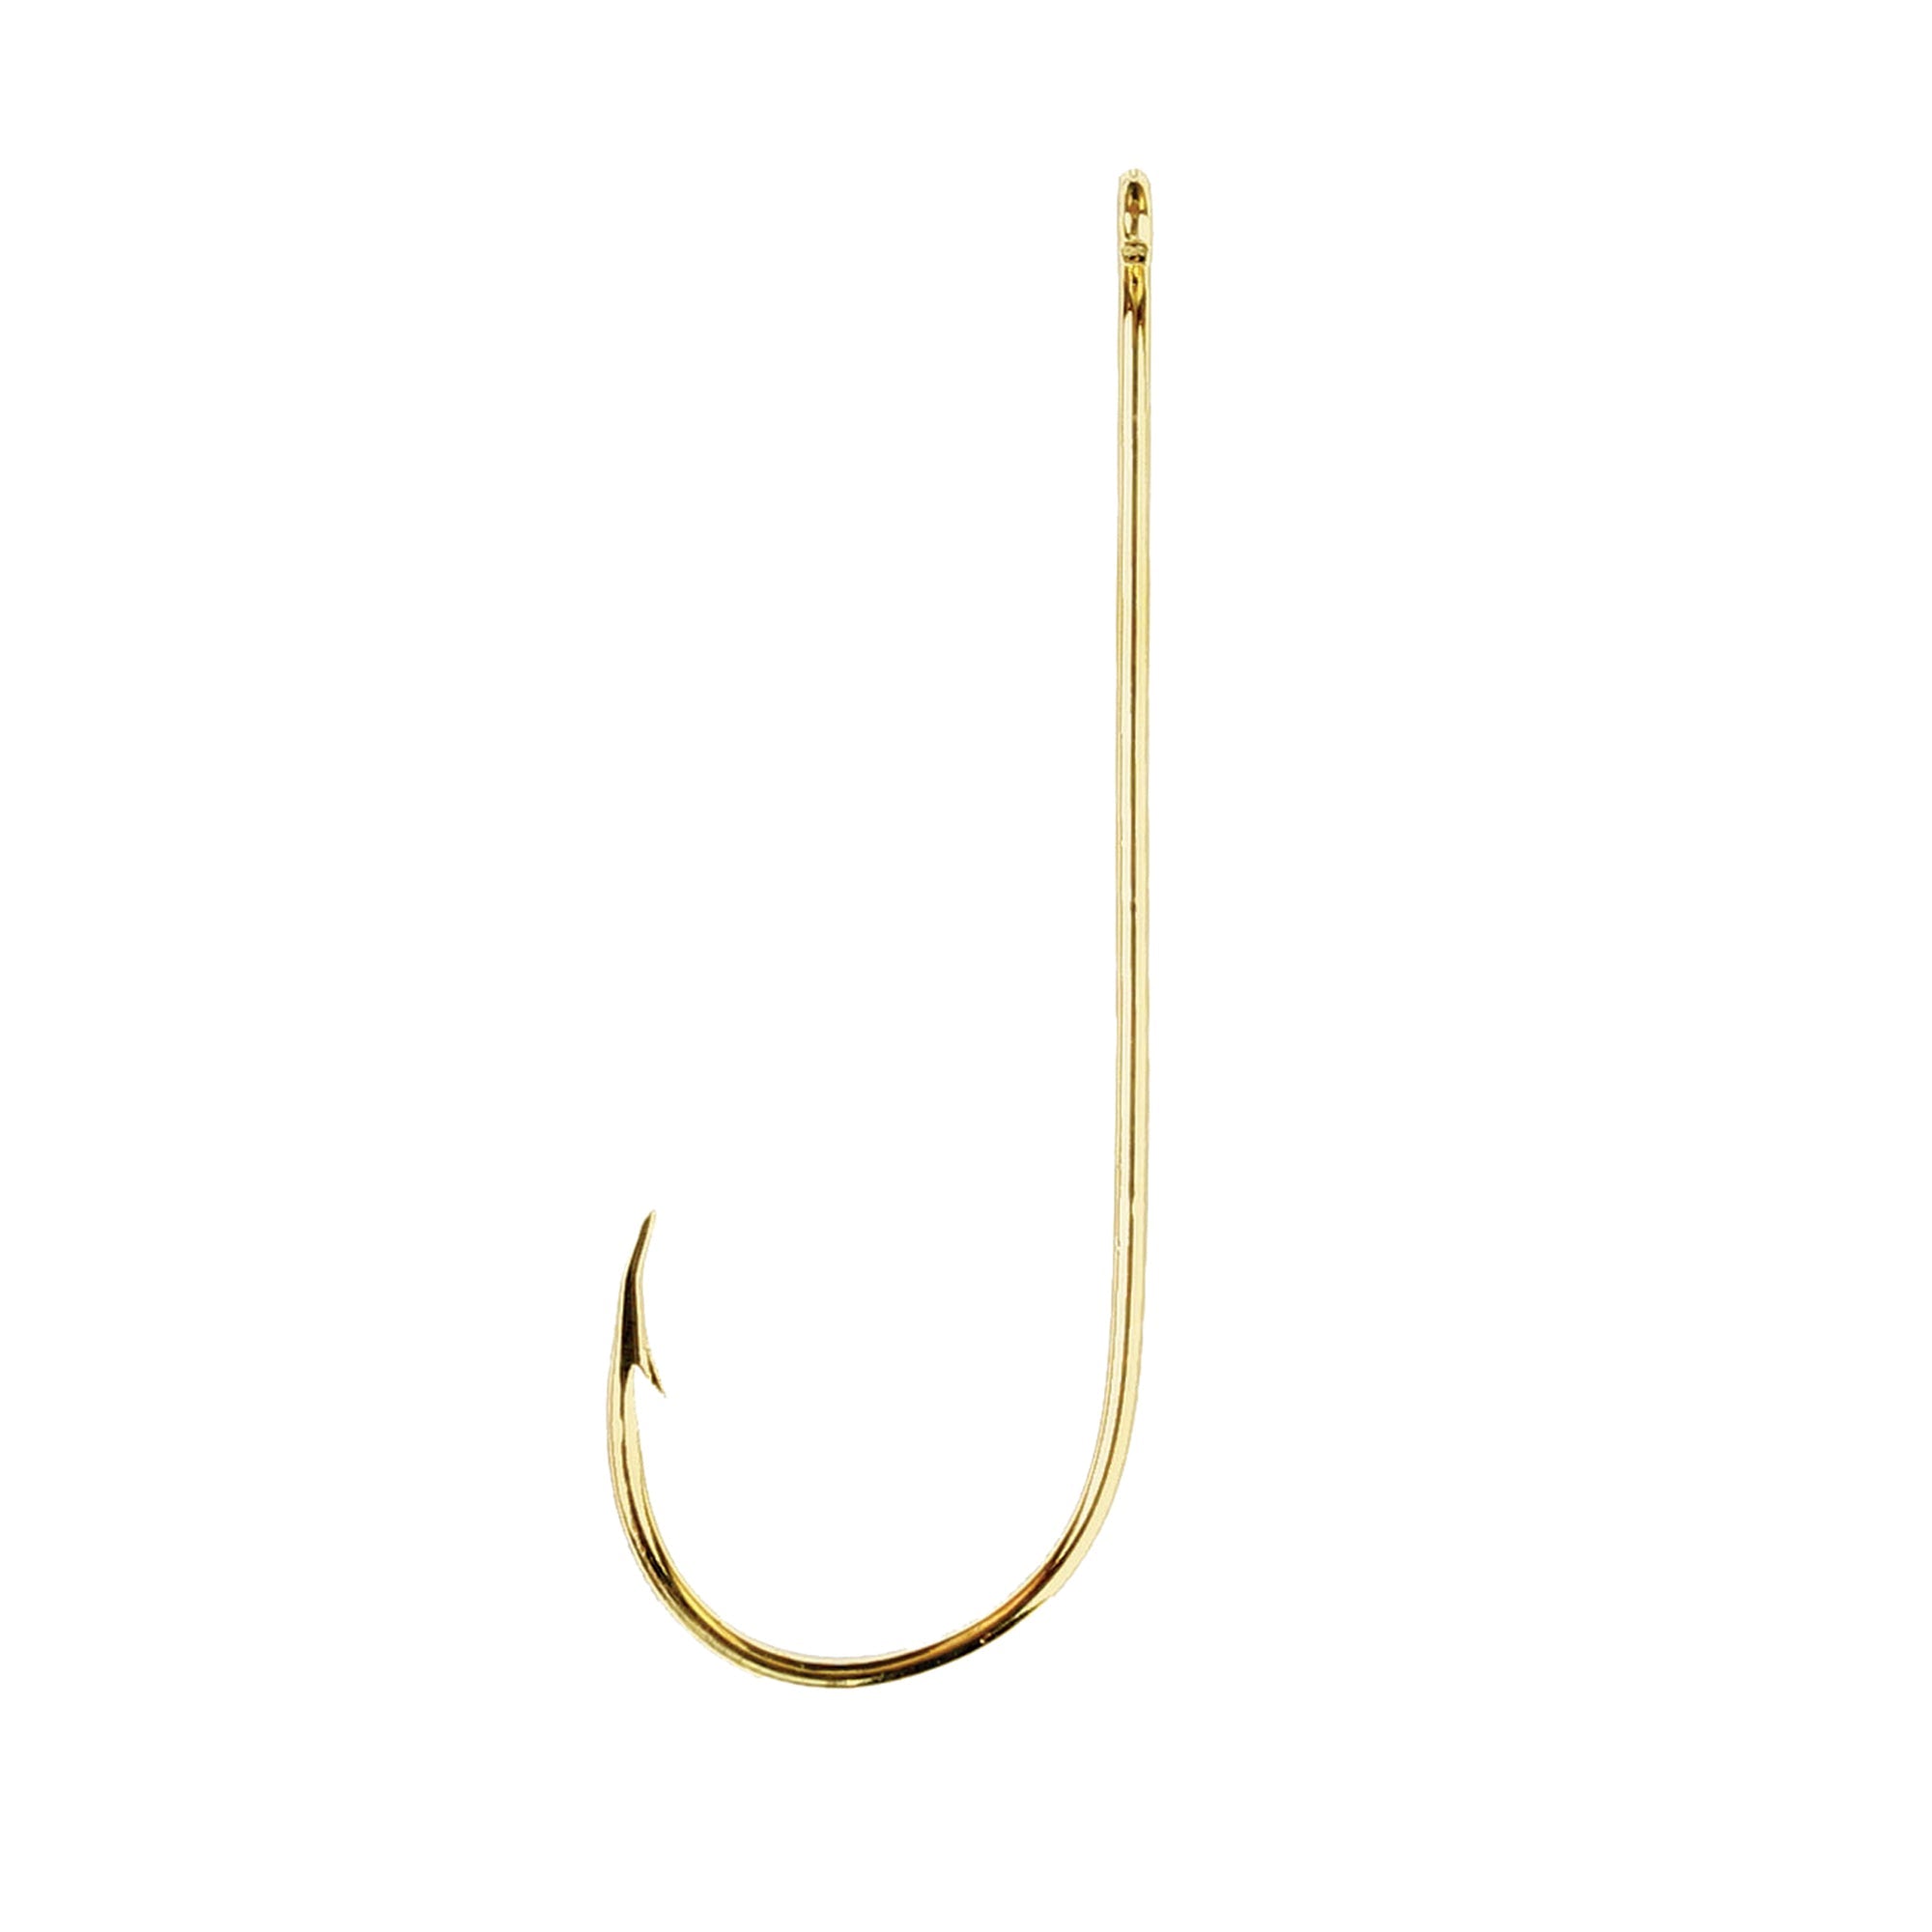 Eagle Claw, 1/0 Aberdeen Hook 8-Pack